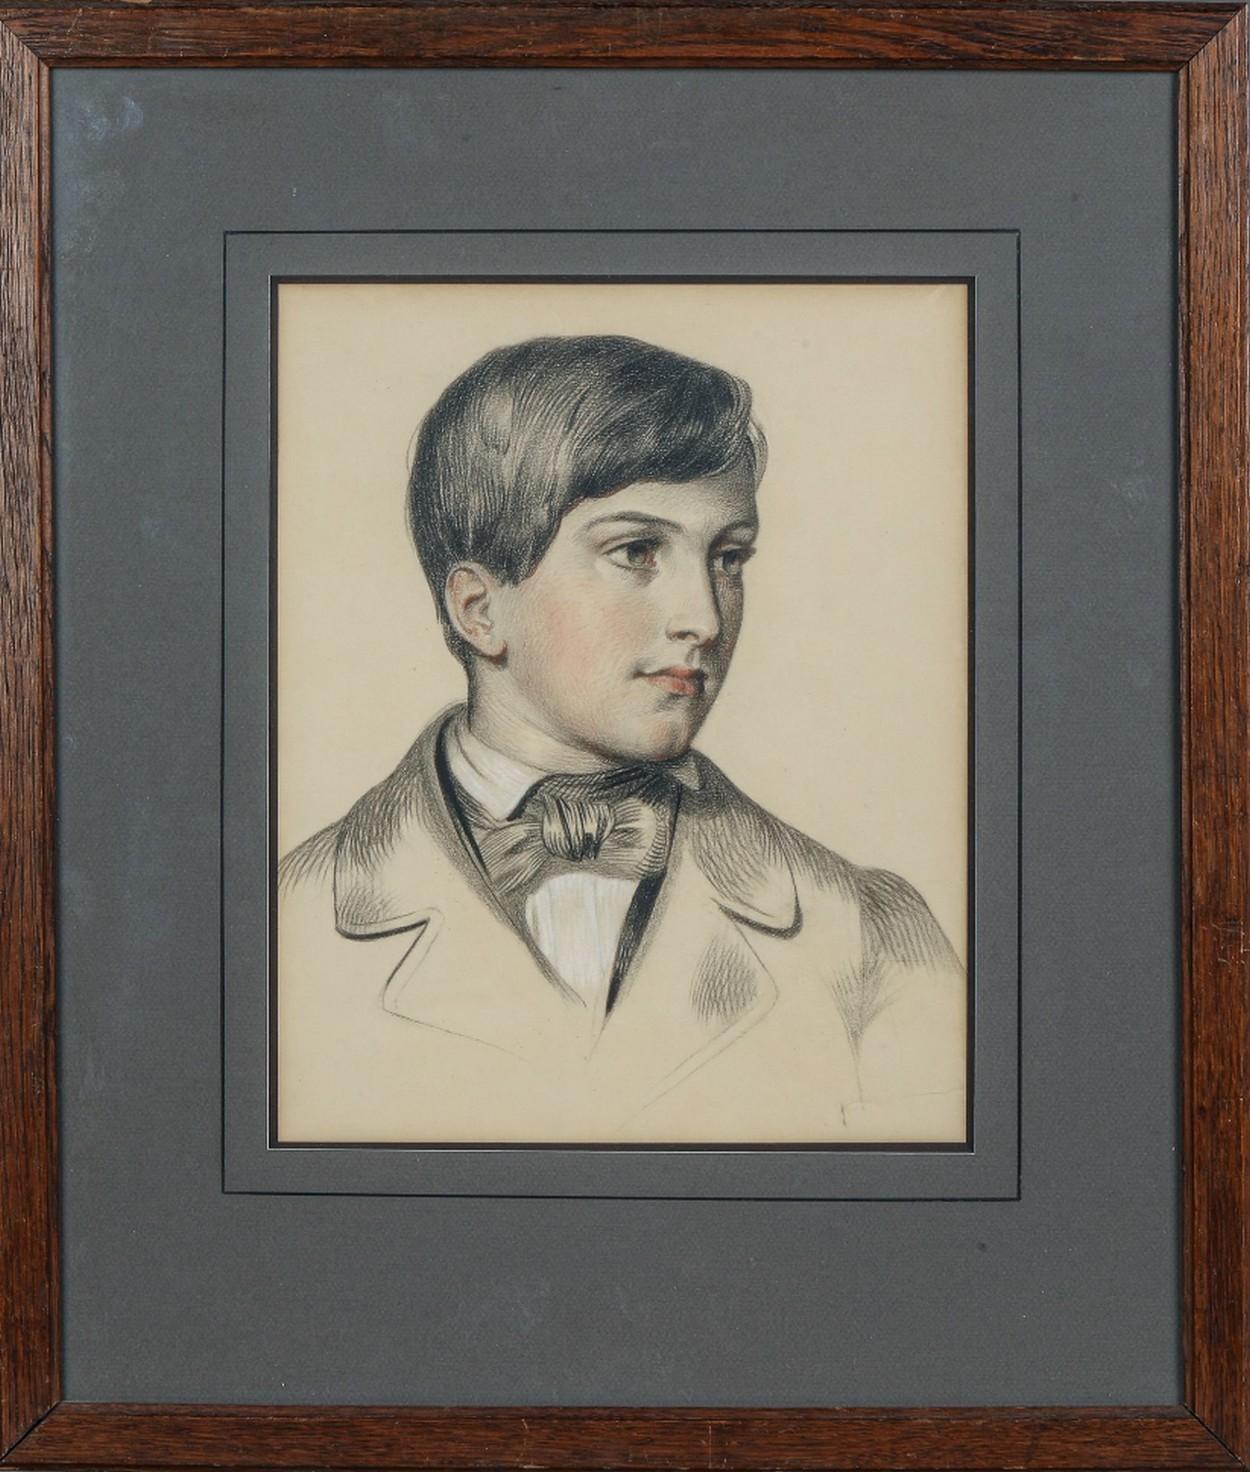 French School 19th century, Portrait of a young boy, drawing  - Art by Unknown